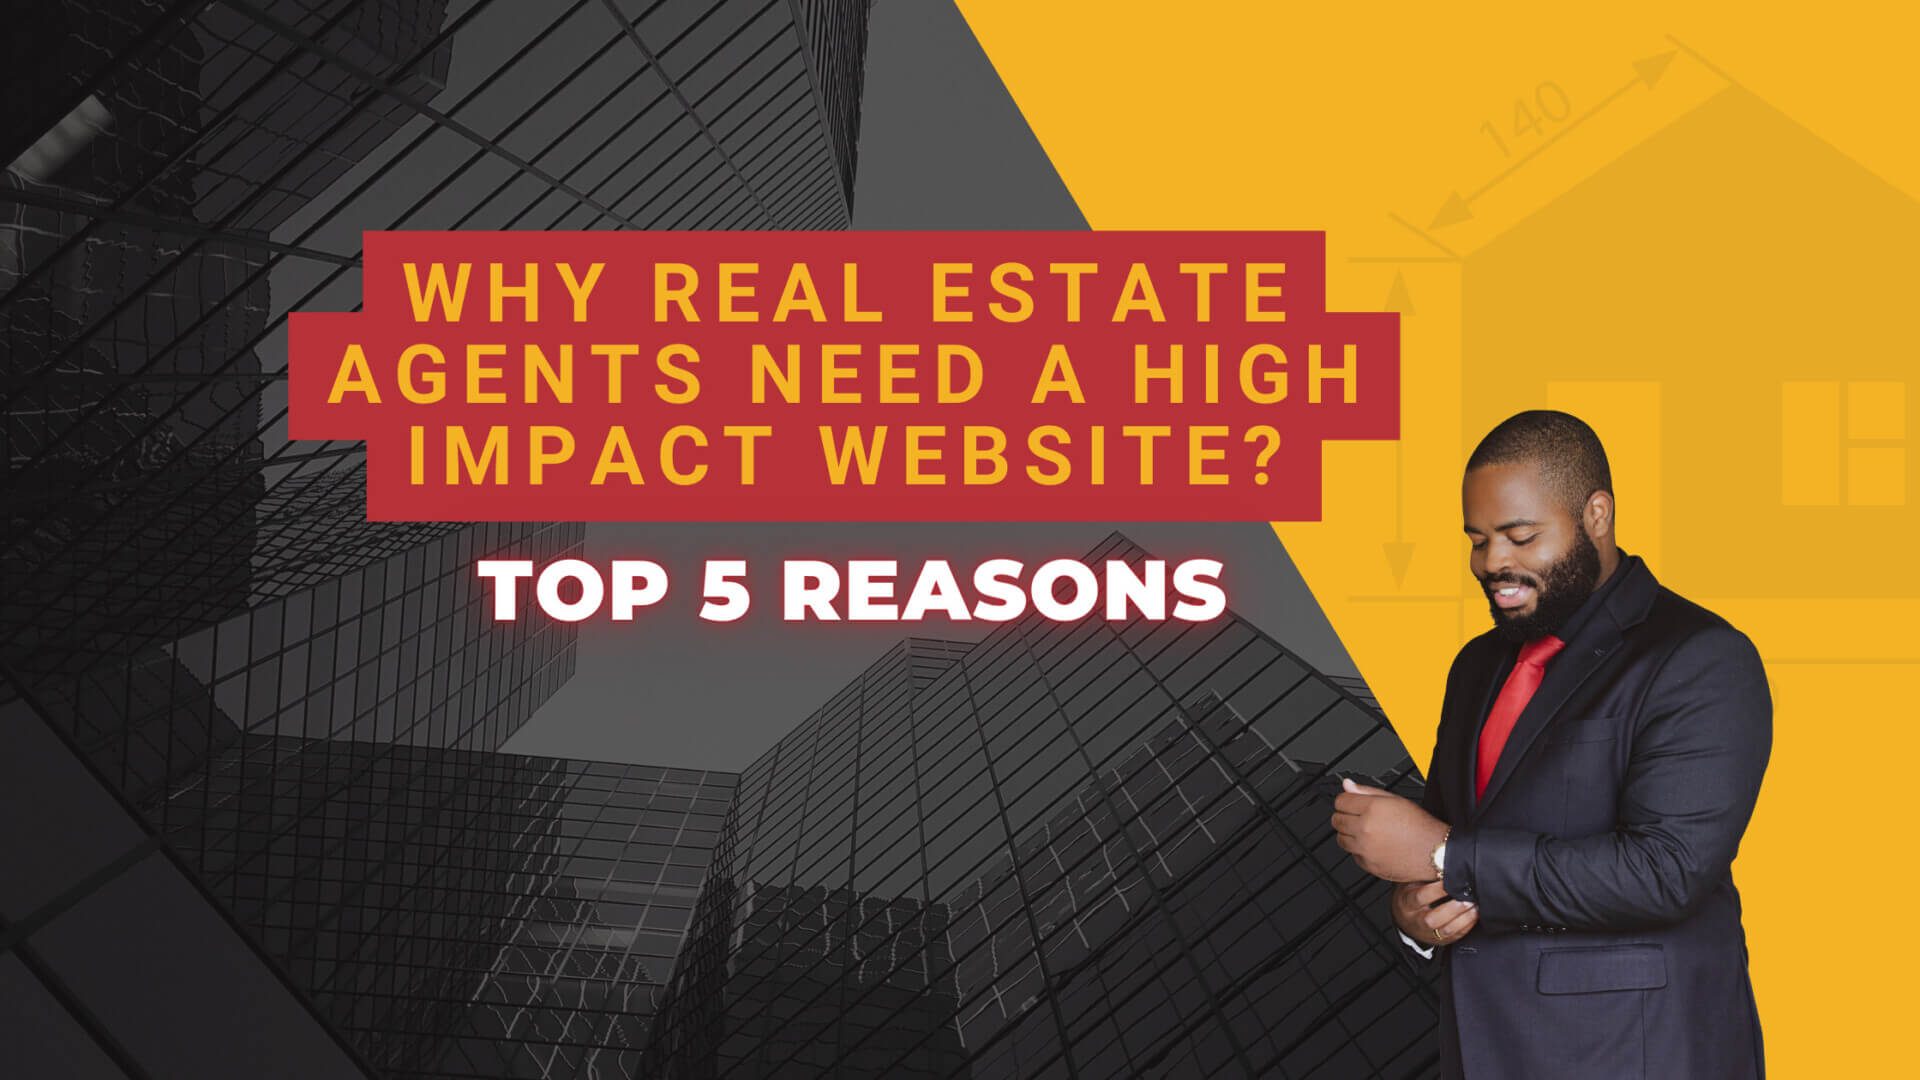 Why real estate agents need a high impact website?